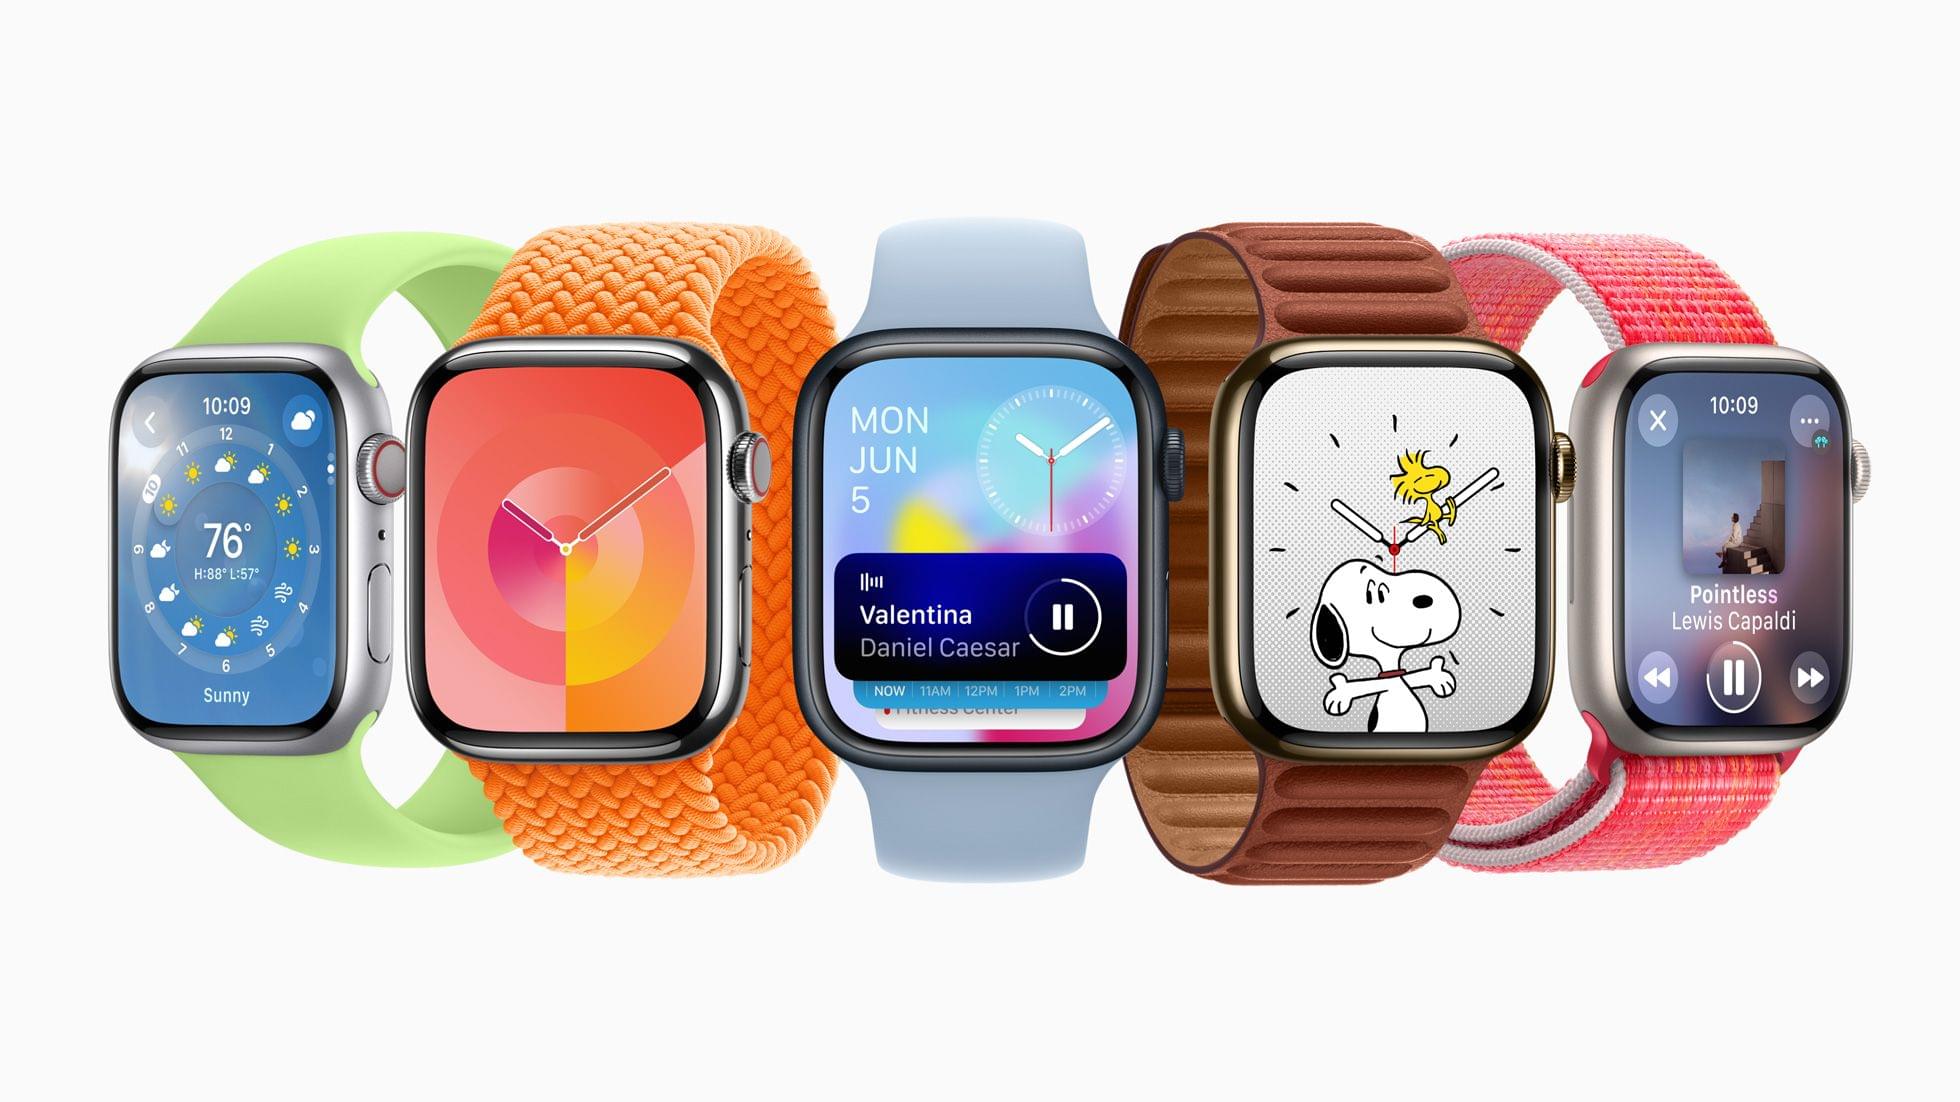 A small selection of the many band options for the standard Apple Watch. Source: Apple.